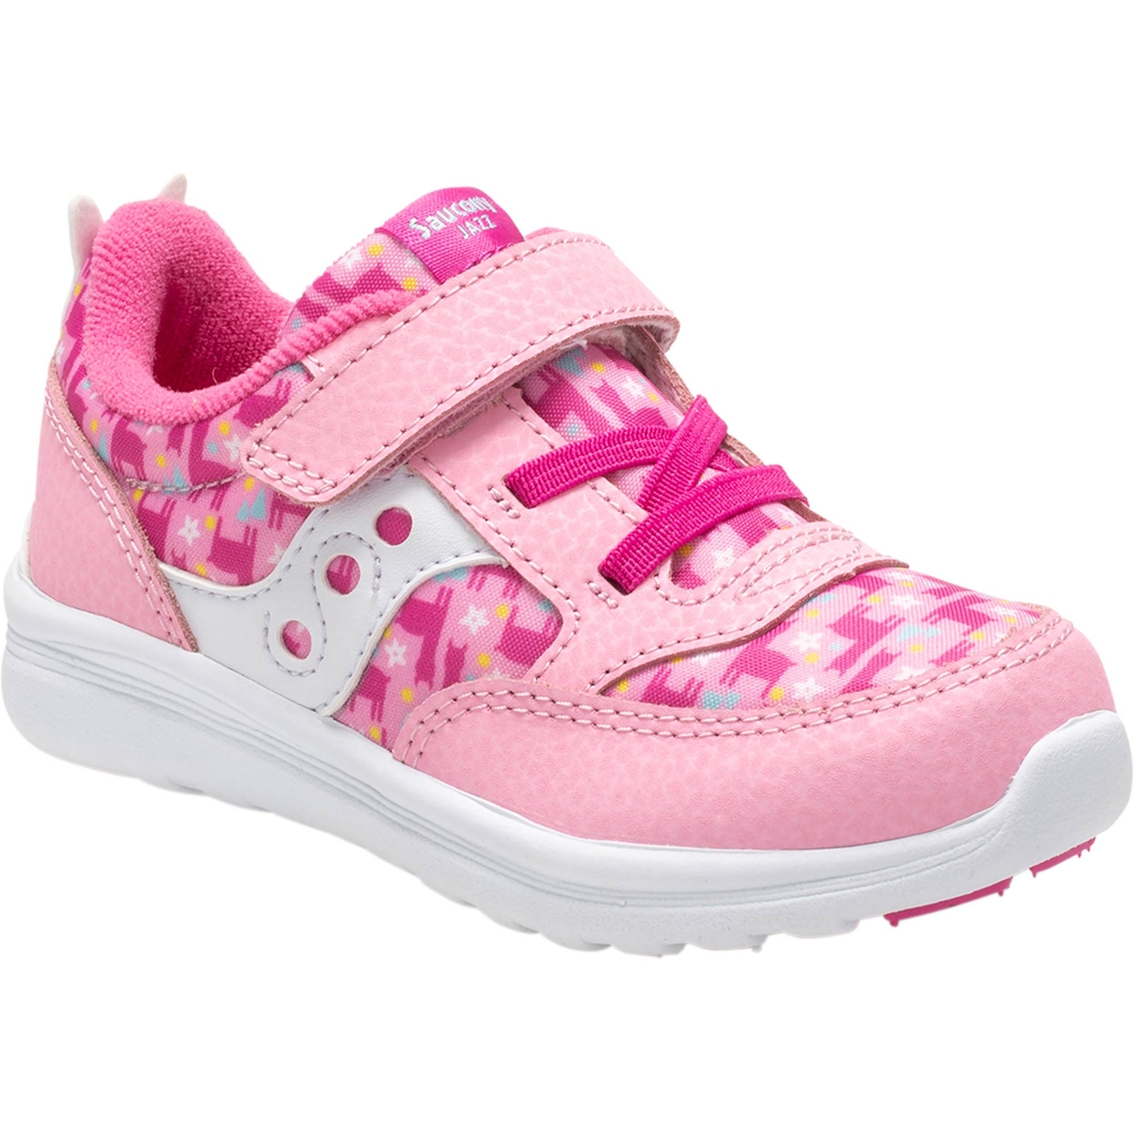 Saucony Toddler Girls Baby Jazz Lite Sneakers | Sneakers | Shoes | Shop ...